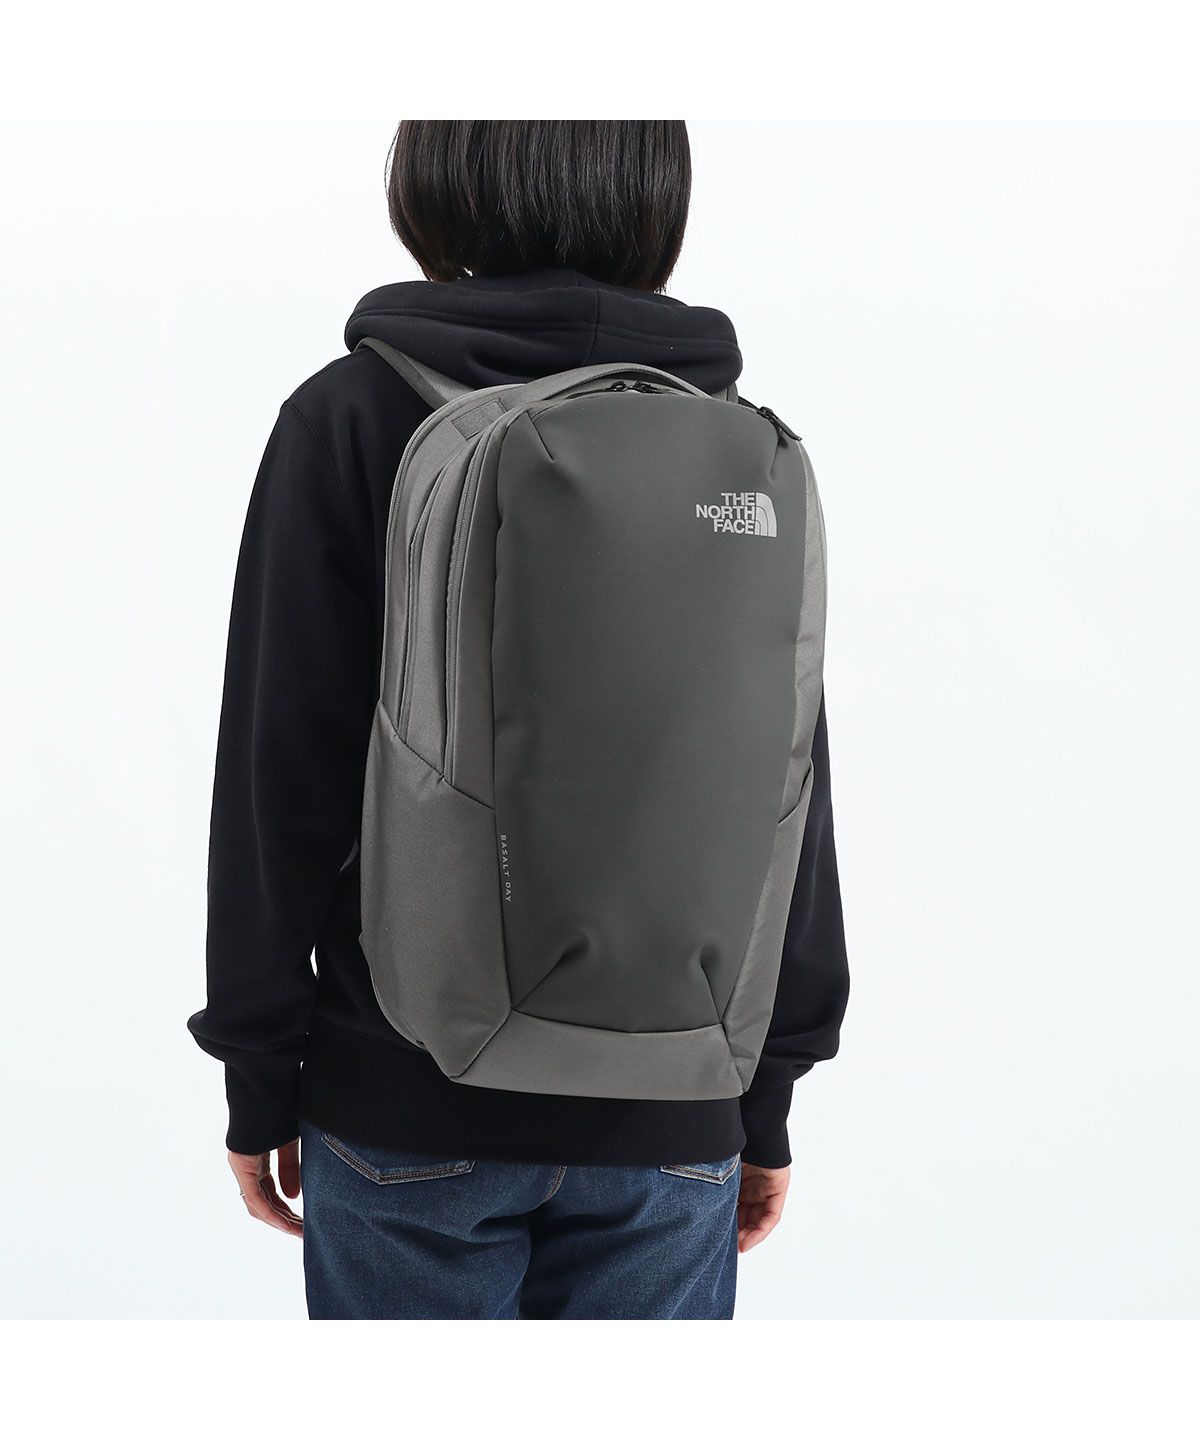 THE NORTH FACE Basalt Day NM82164